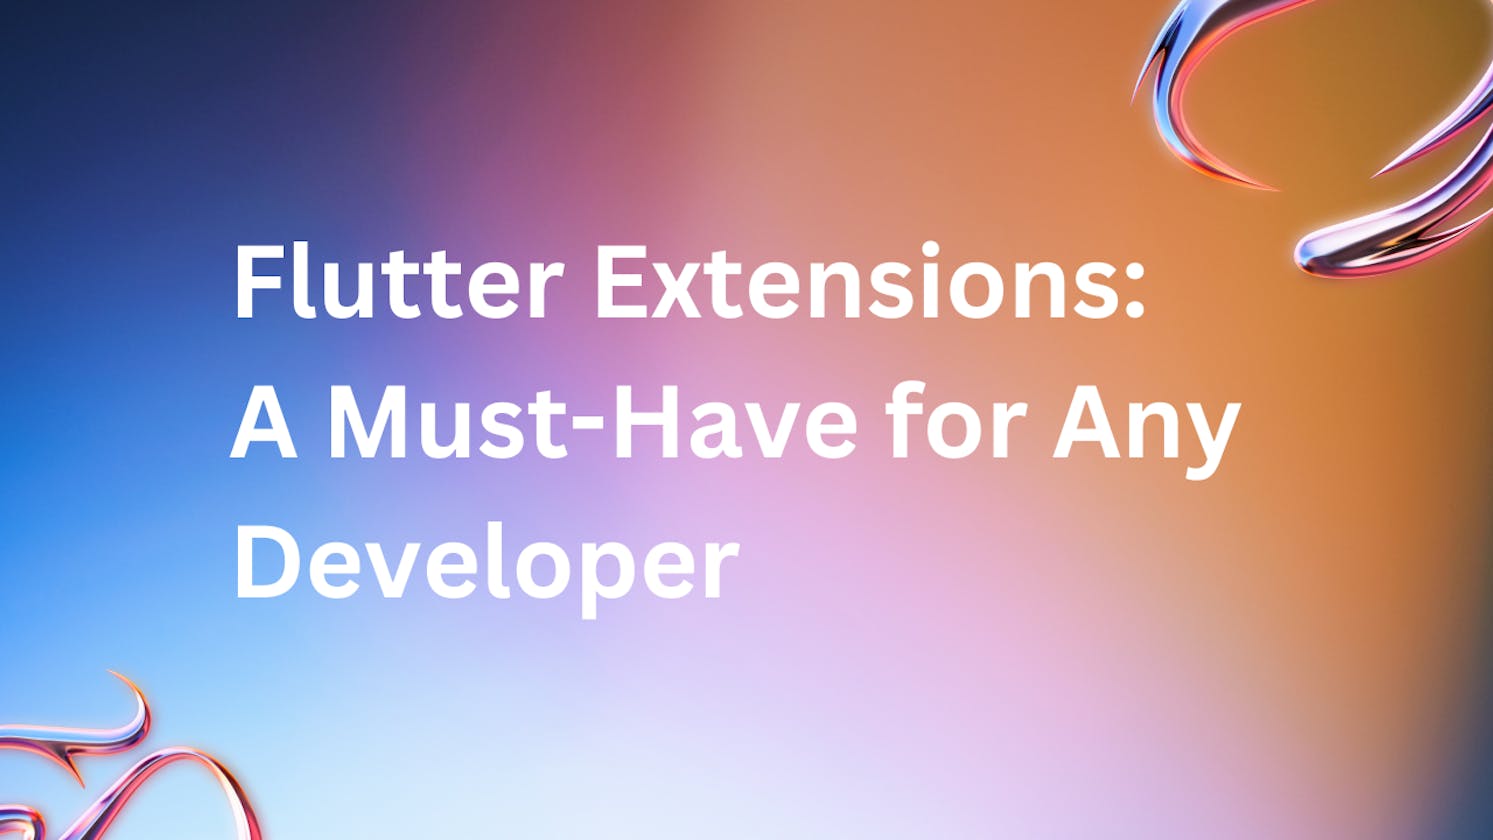 Flutter Extensions: A Must-Have for Any Developer